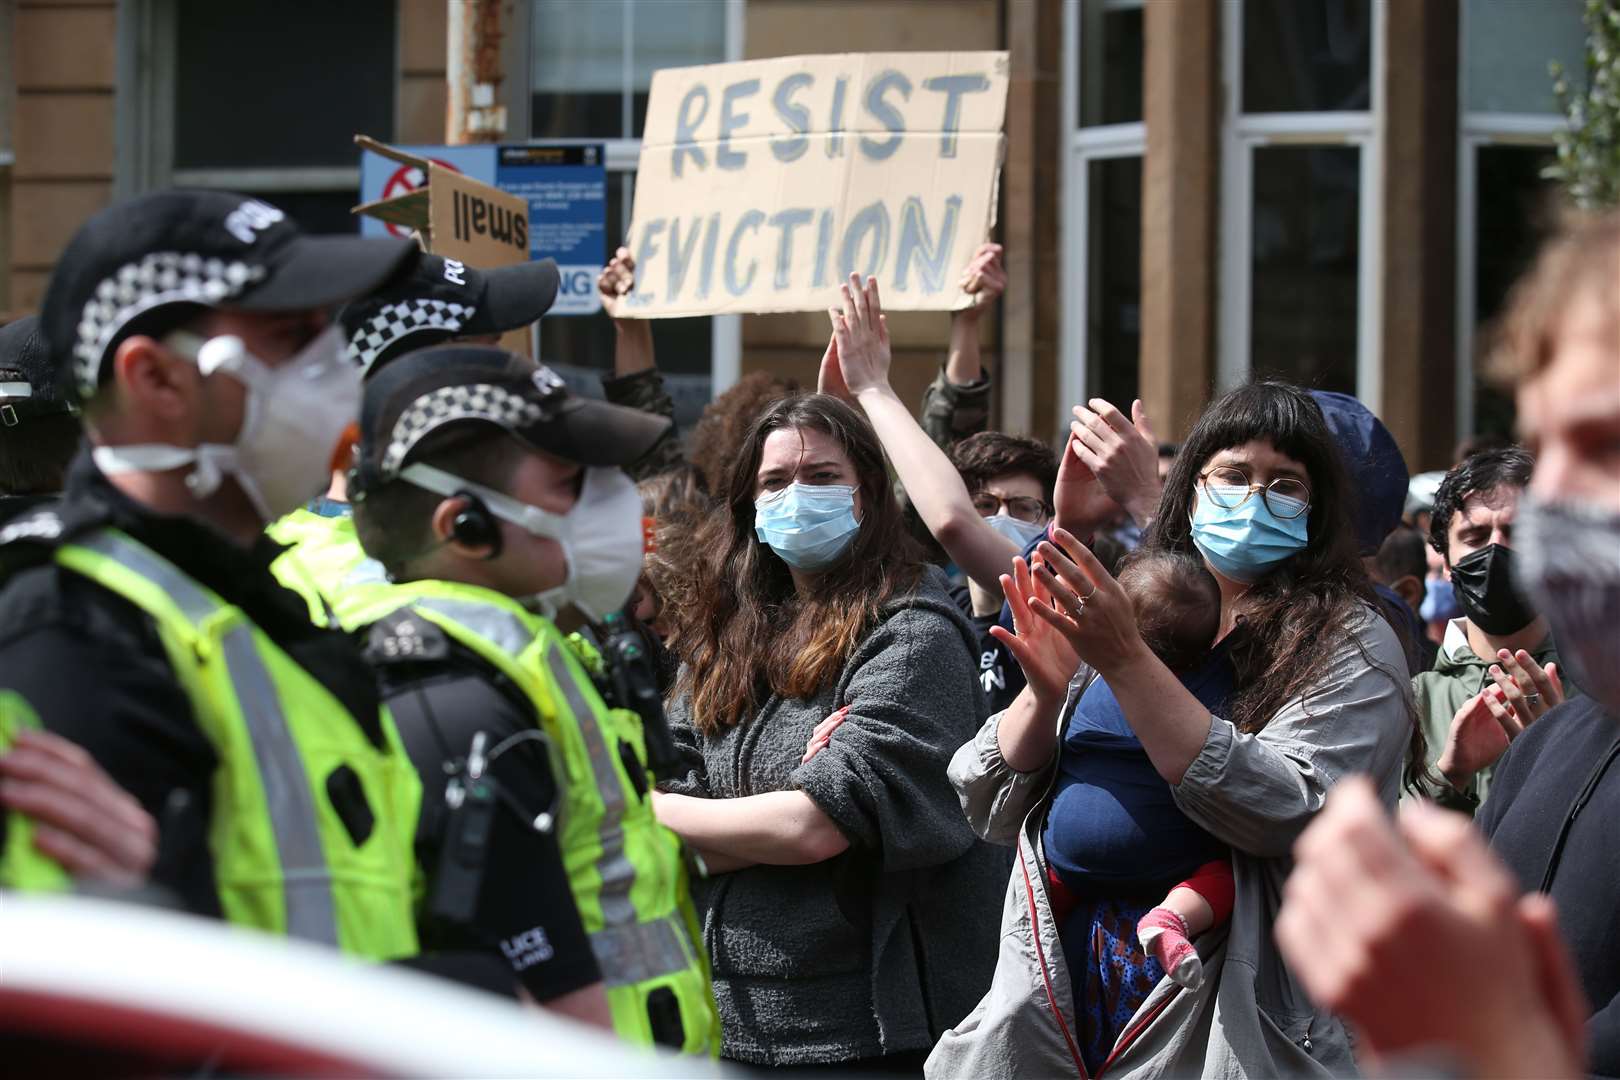 Hundreds of protesters attempted to stop the van from leaving (Andrew Milligan/PA)